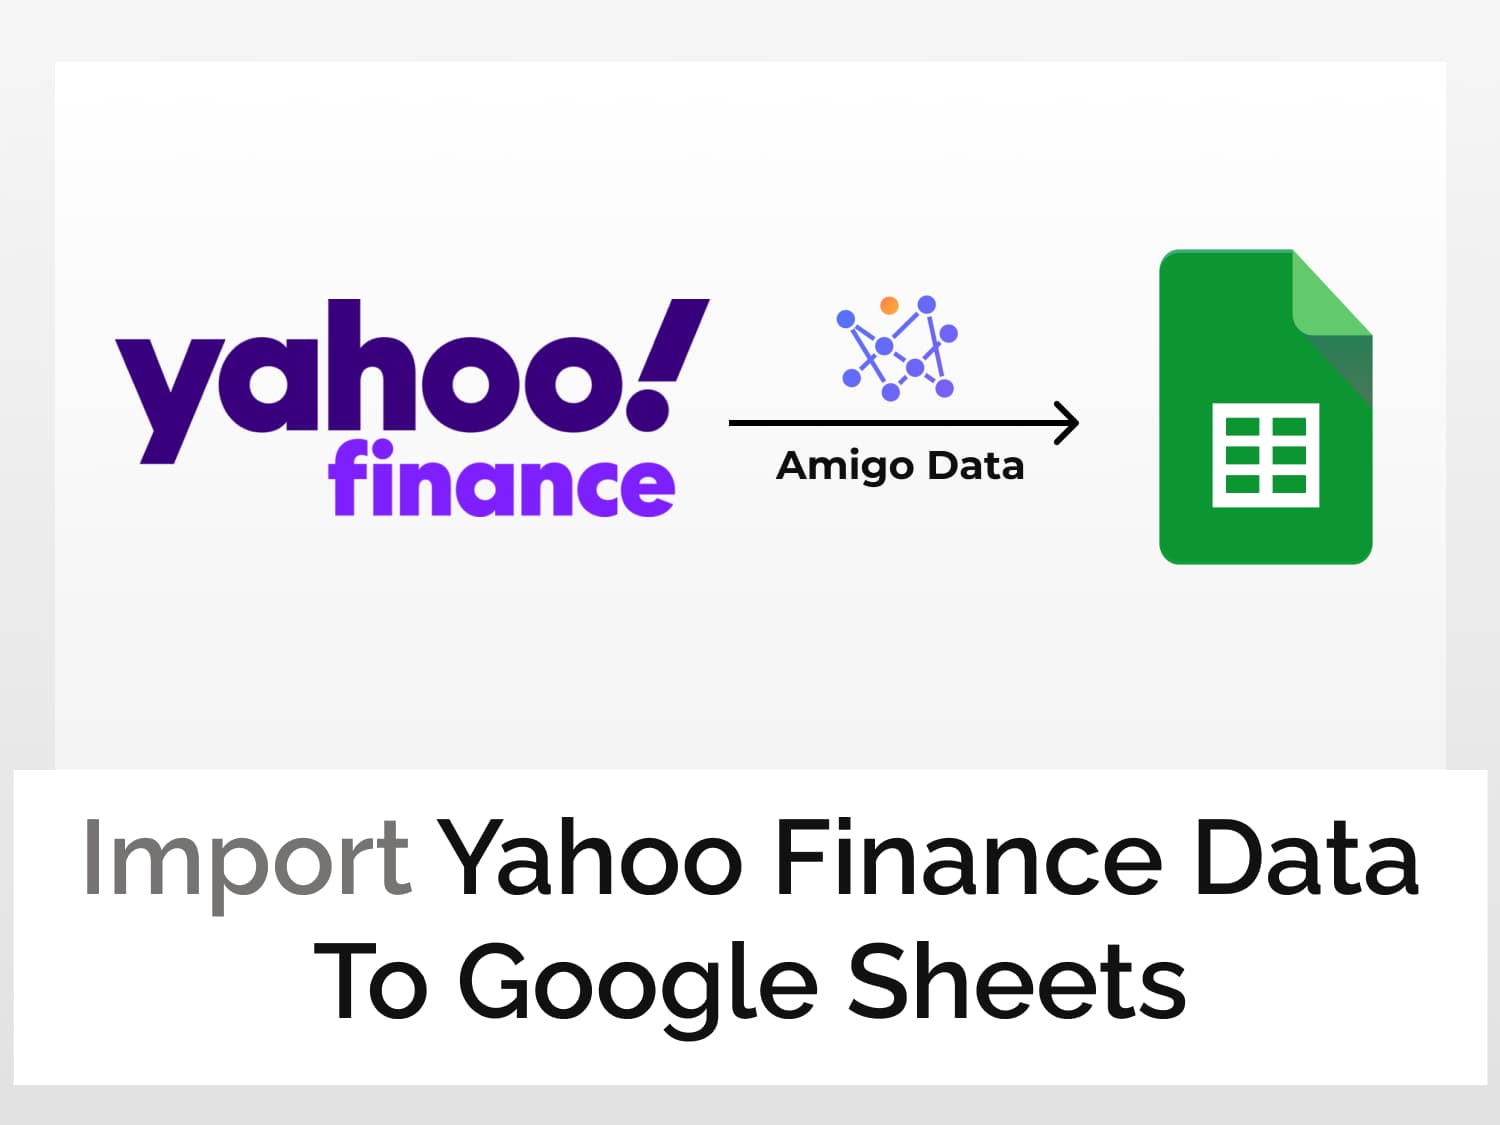 import data from Yahoo Finance into Google Sheets